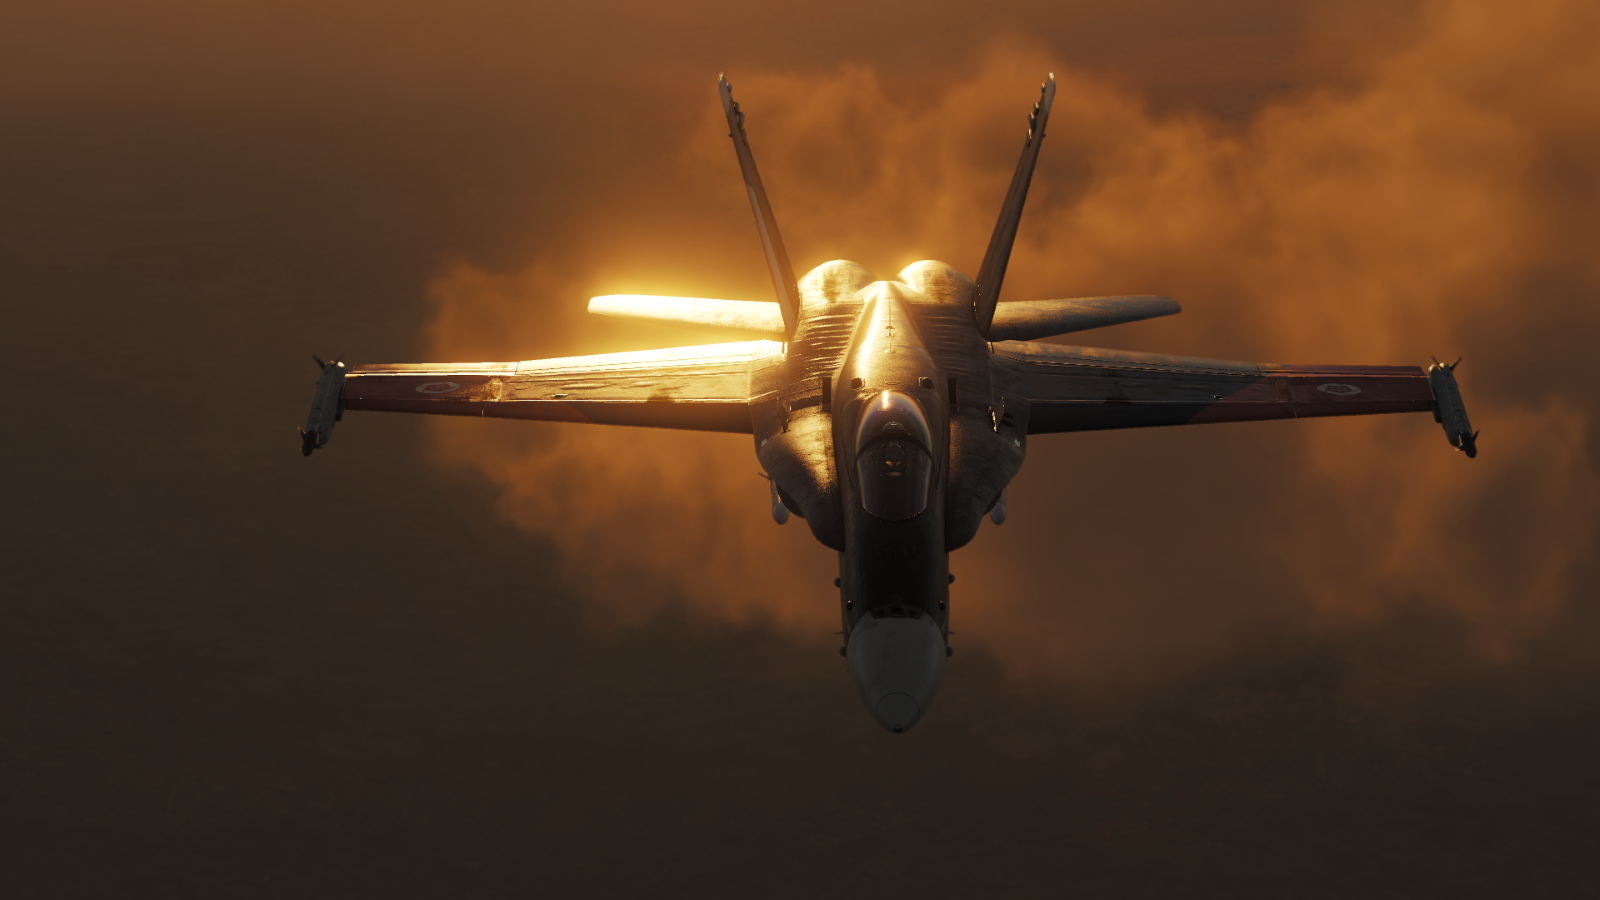 ace combat 7 mihaly